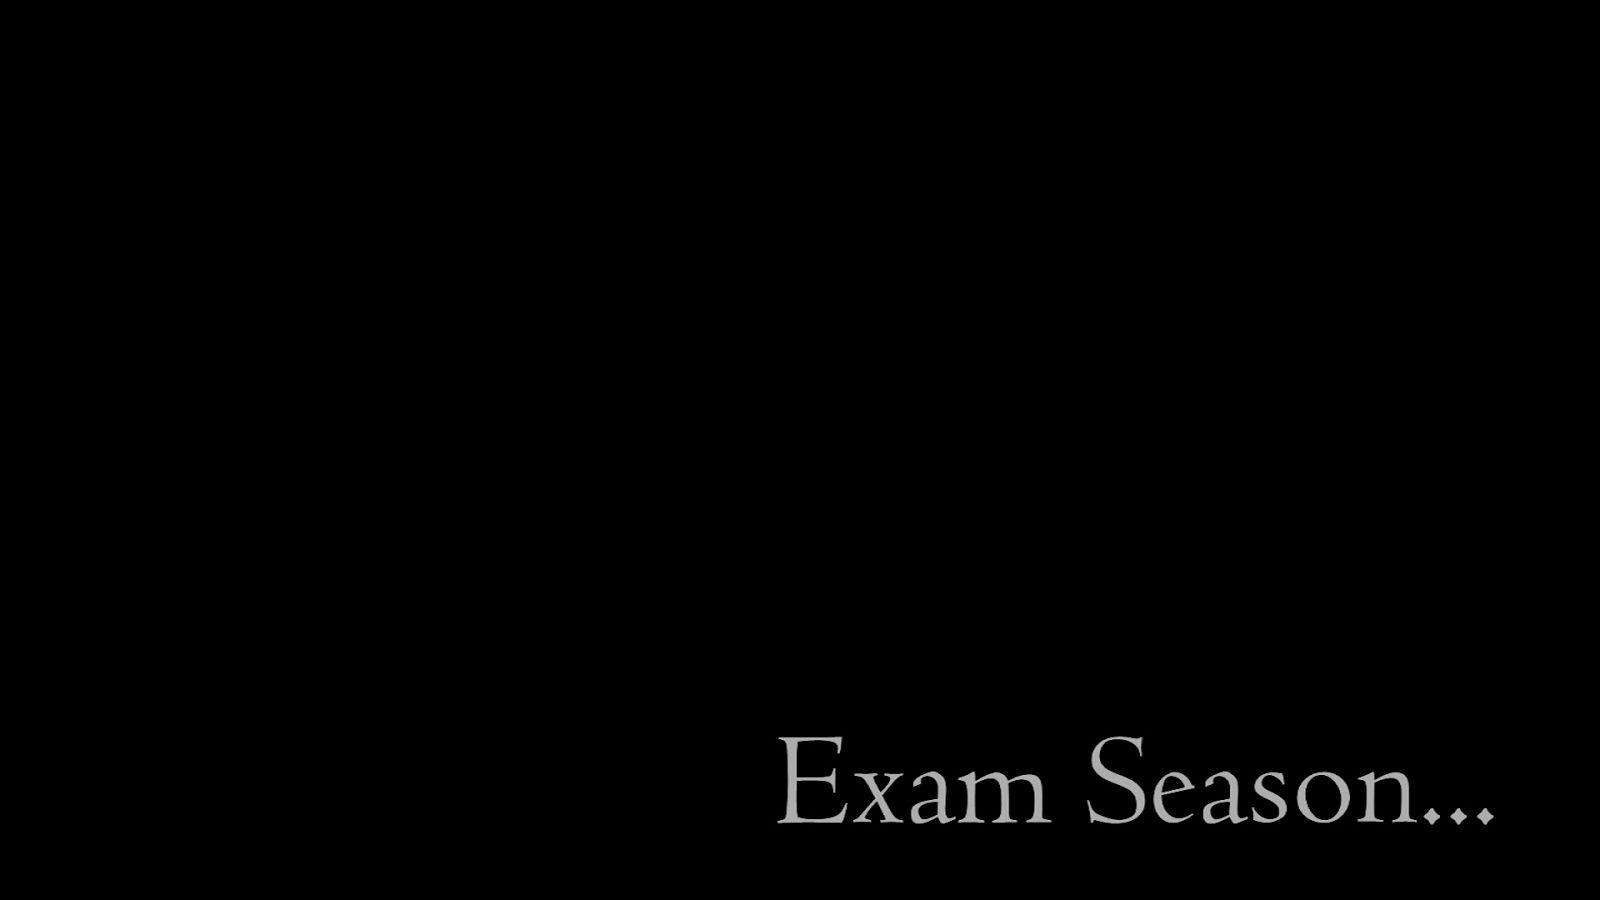 Exam Thought Wallpapers - Wallpaper Cave